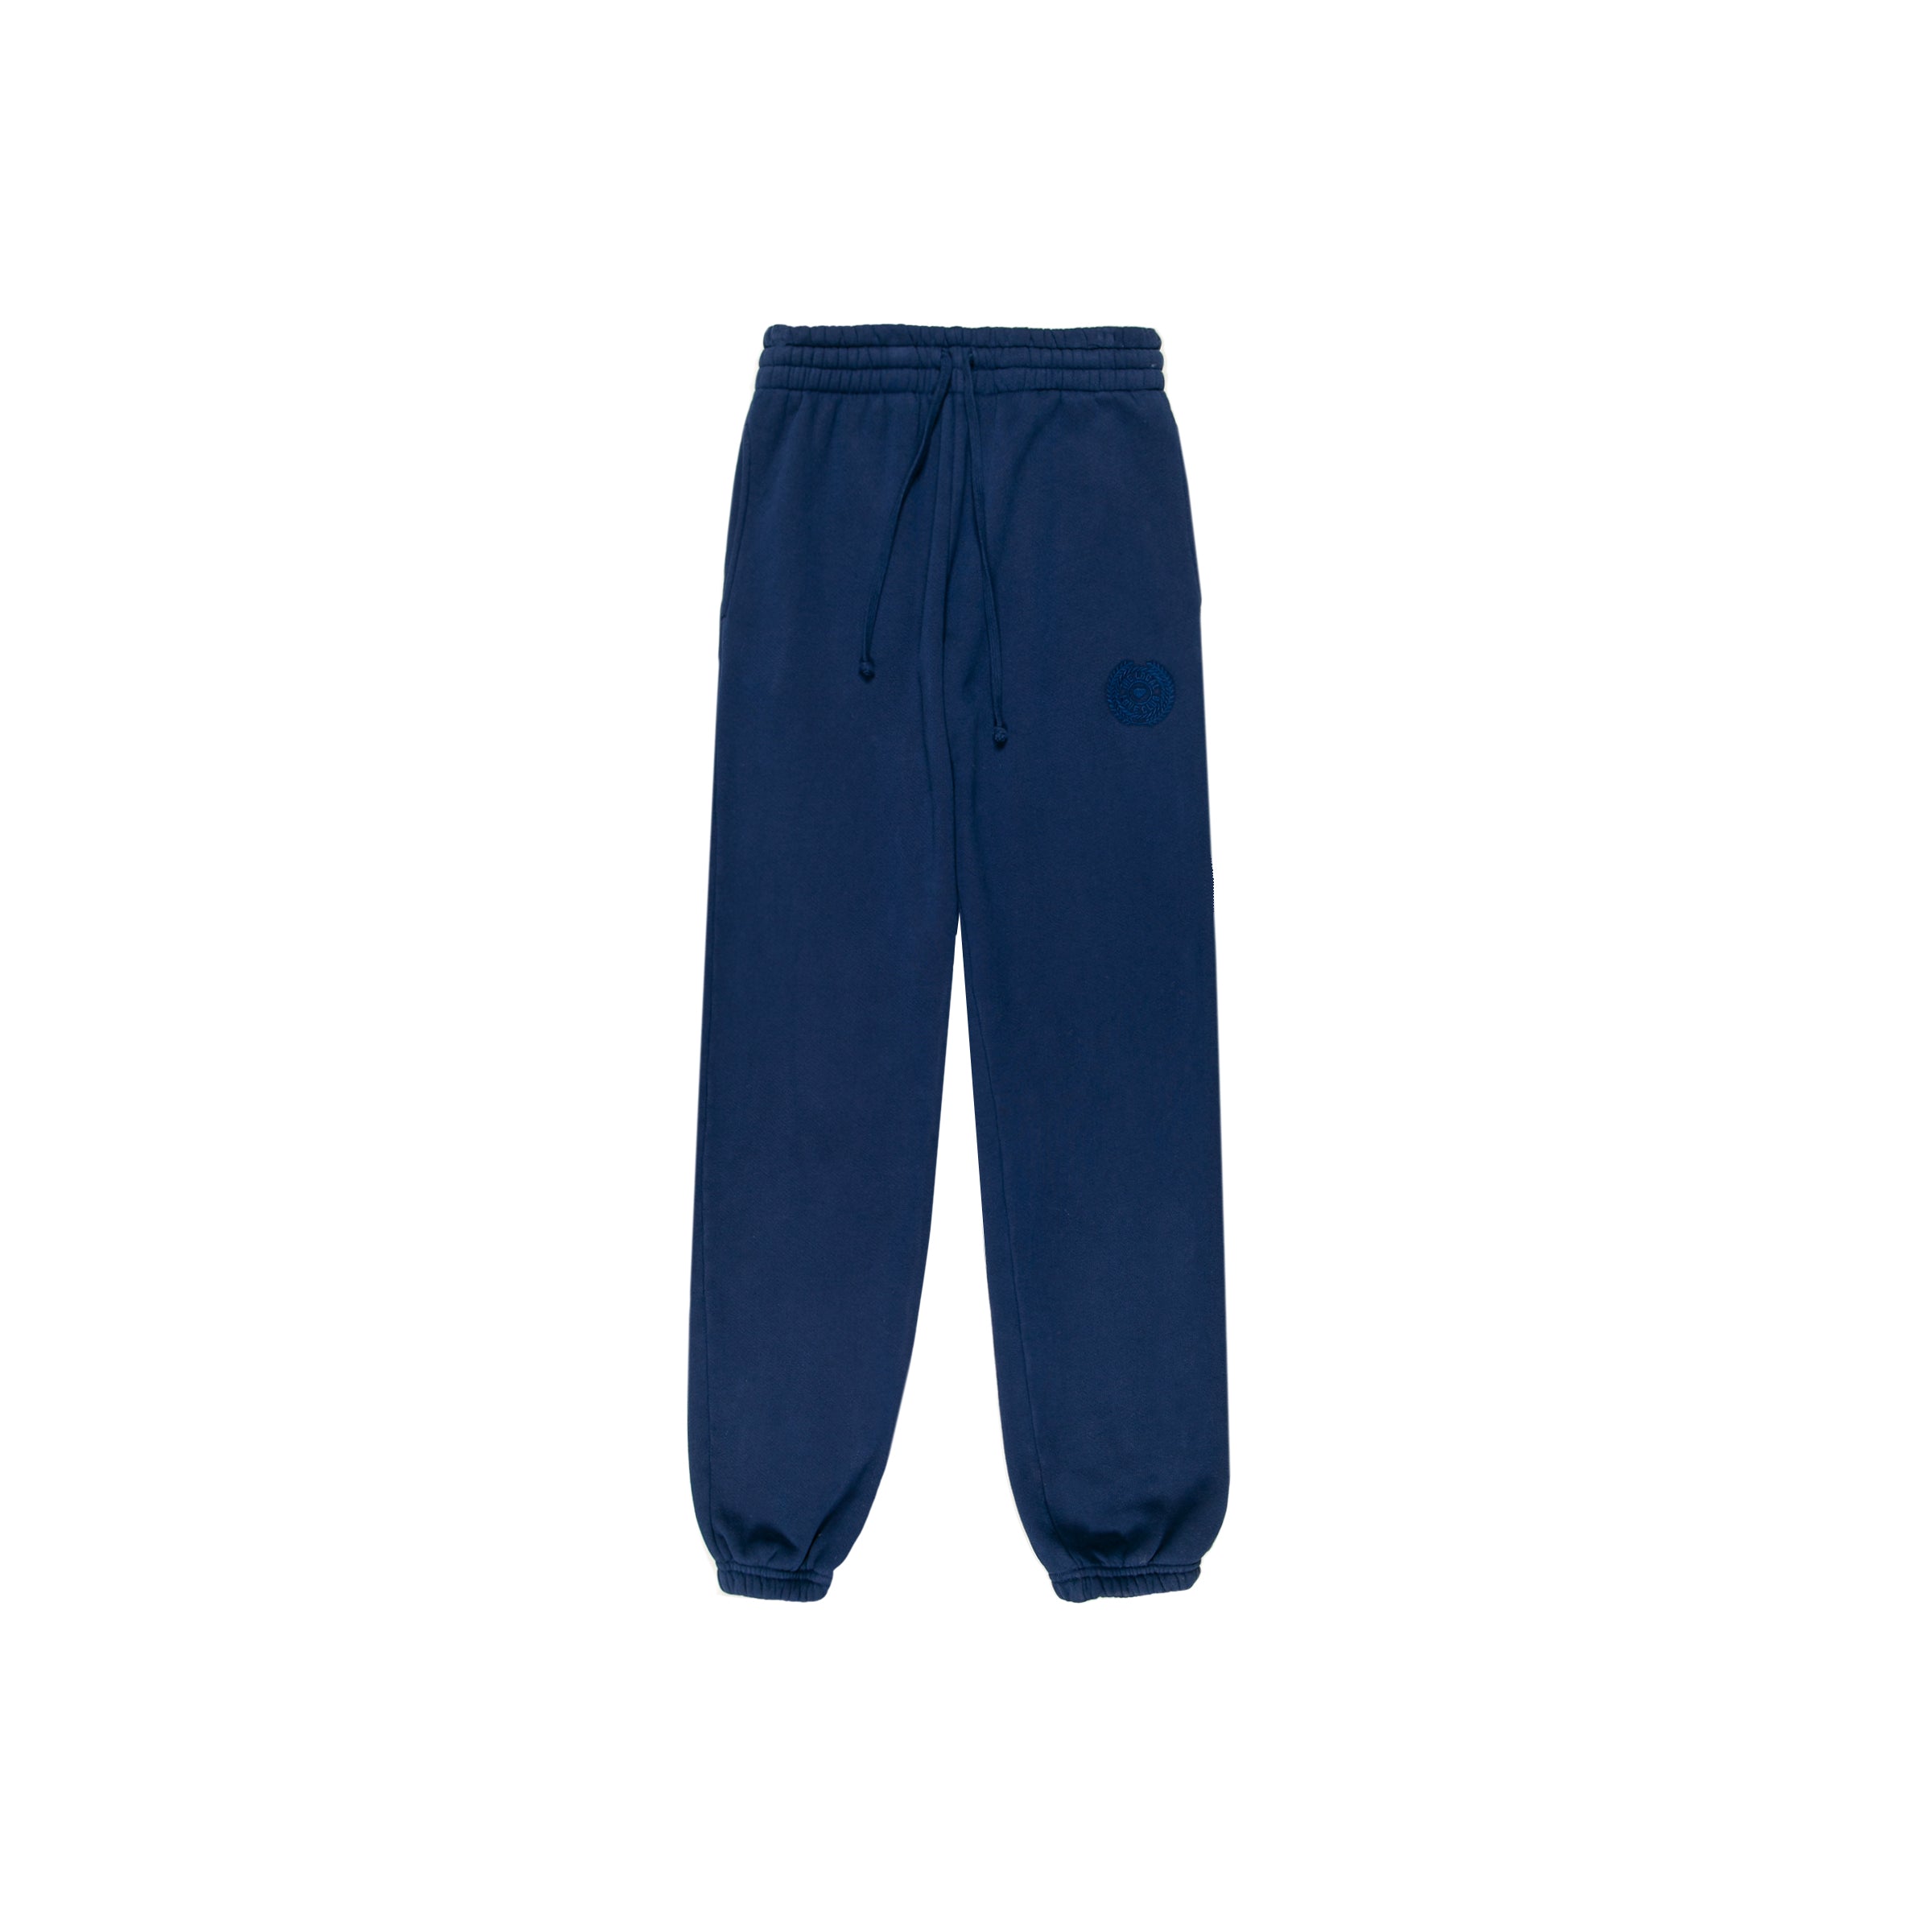 Vitals Pant in Navy